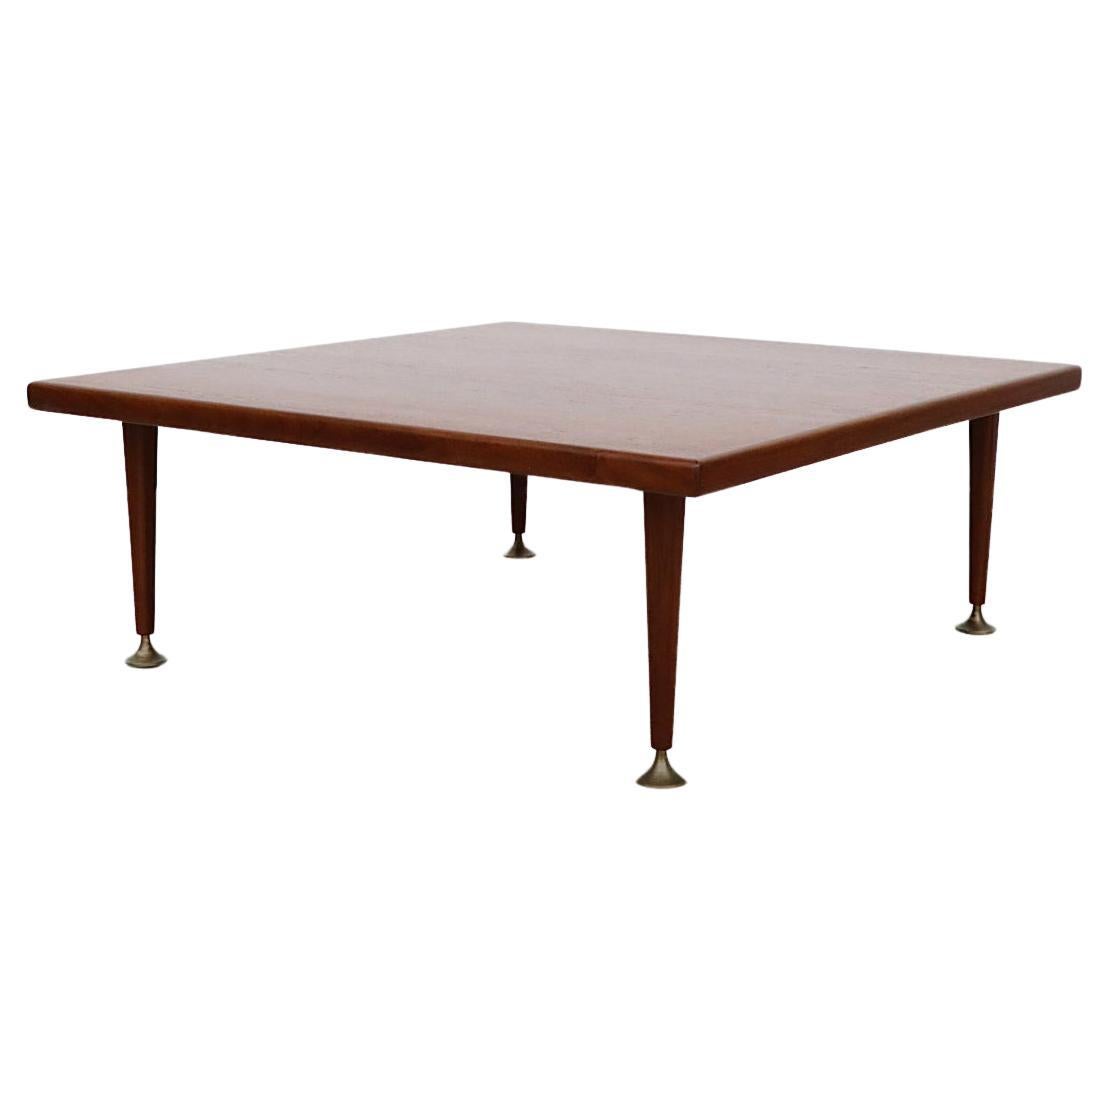 Mid-Century A.A. Patijn Square Teak Coffee Table with Self Leveling Brass Feet